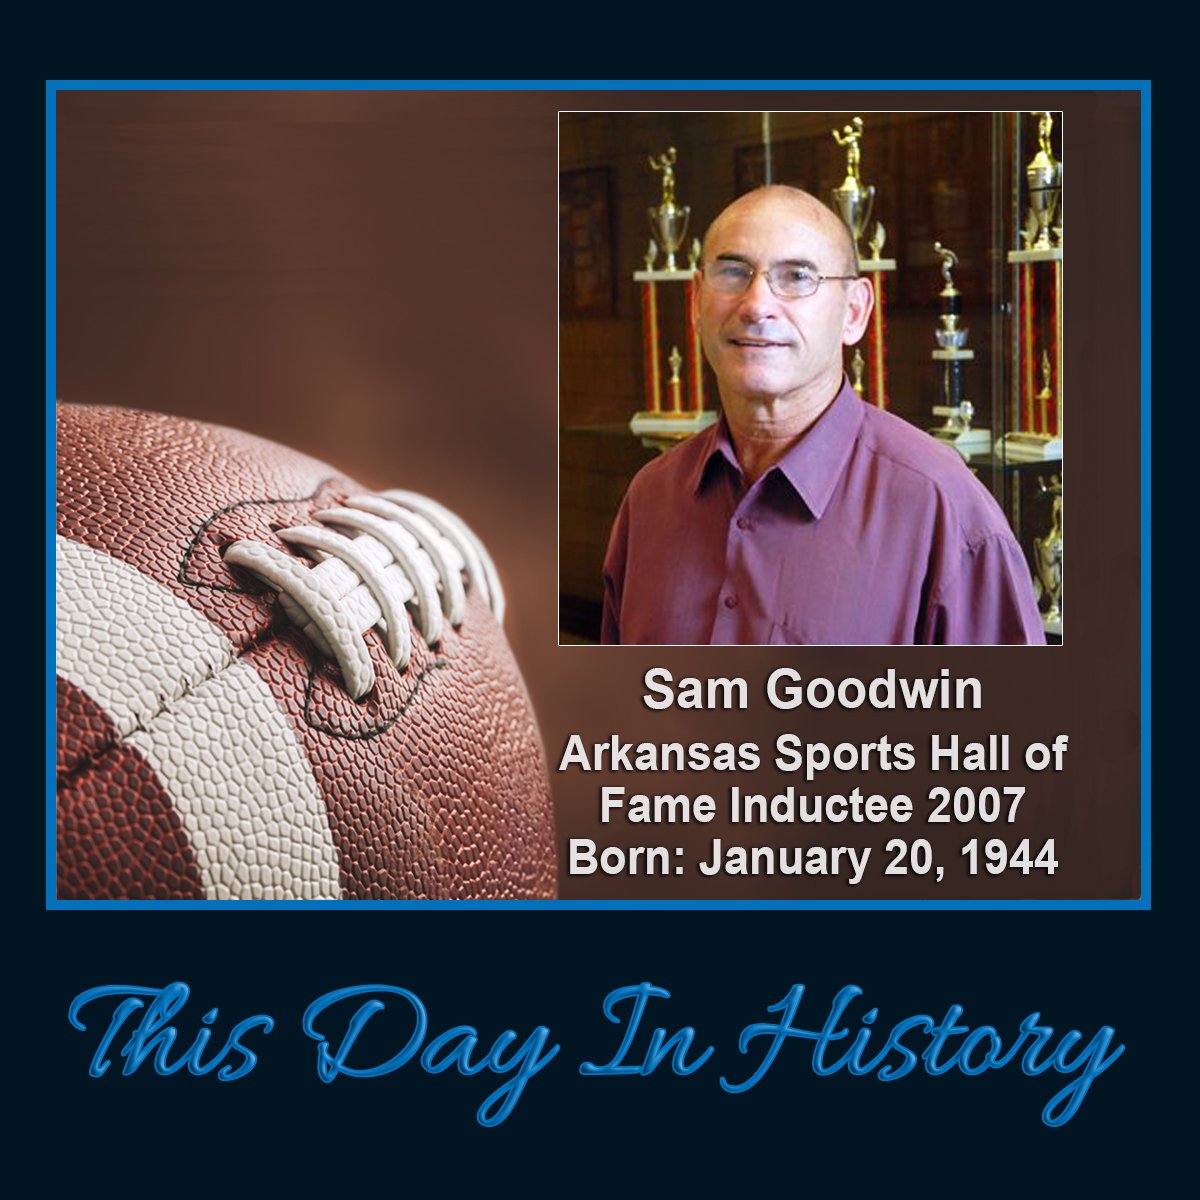 Sam was a football NAIA All-American at Henderson State (HSU).and was named All-AIC on both offense and defense. He became one of Arkansas’ most successful high school coaches at LR Parkview. He won state championships in 1974 and 1976. 2007 ASHOF Inductee.